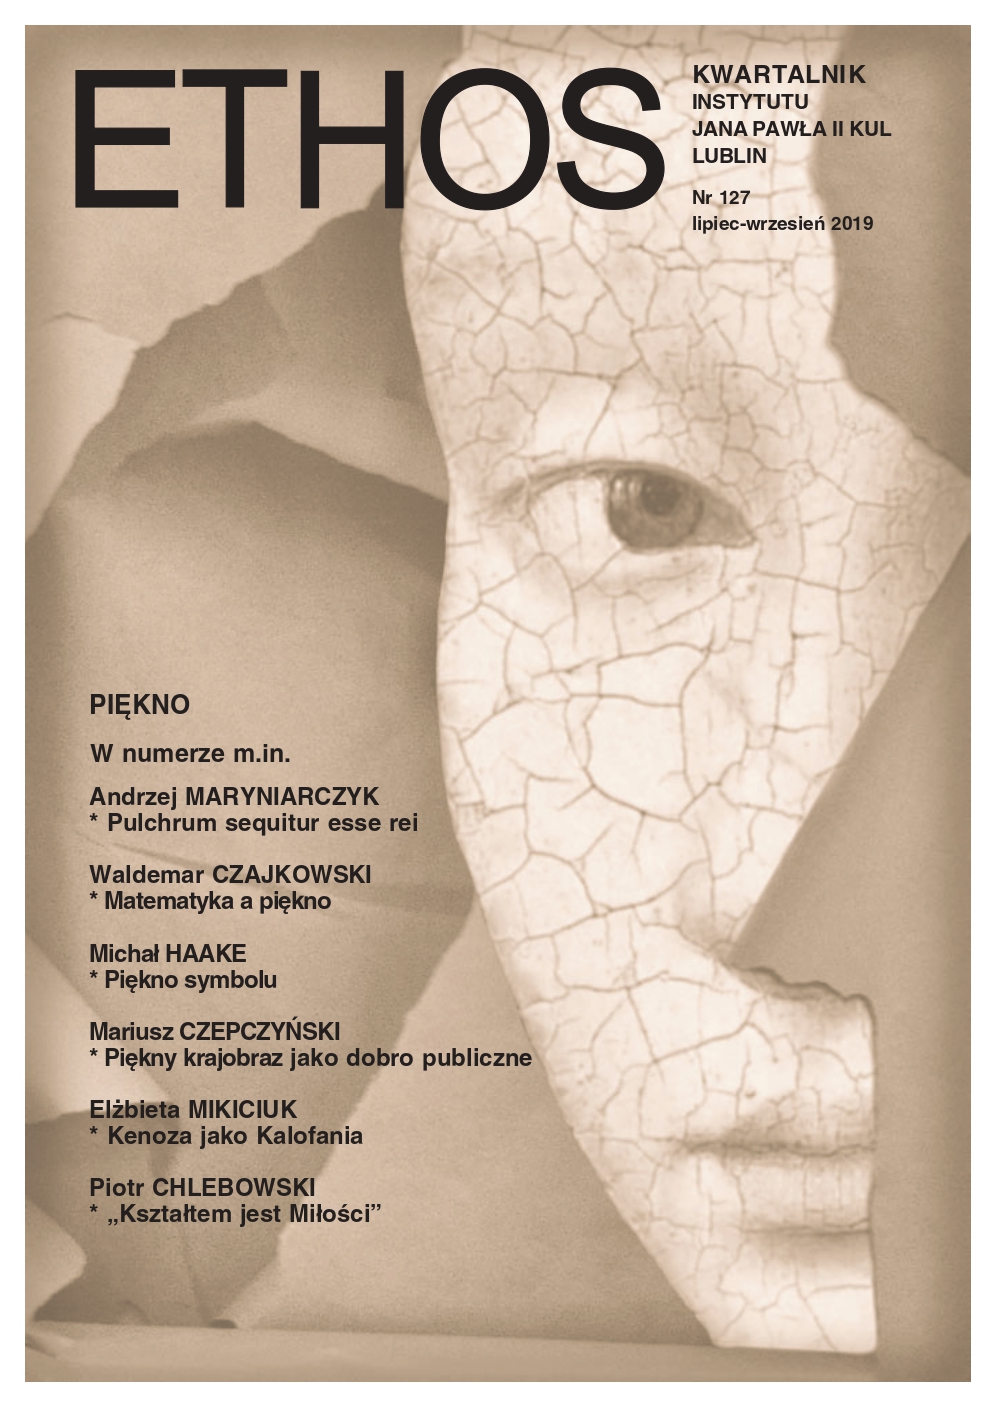 FROM THE HUMAN EXPERIENCE TO THE LOVE OF A PERSON: The Human Person and Their Relationships with Others, as seen in the Literary Output of Karol Wojtyła–John Paul II Cover Image